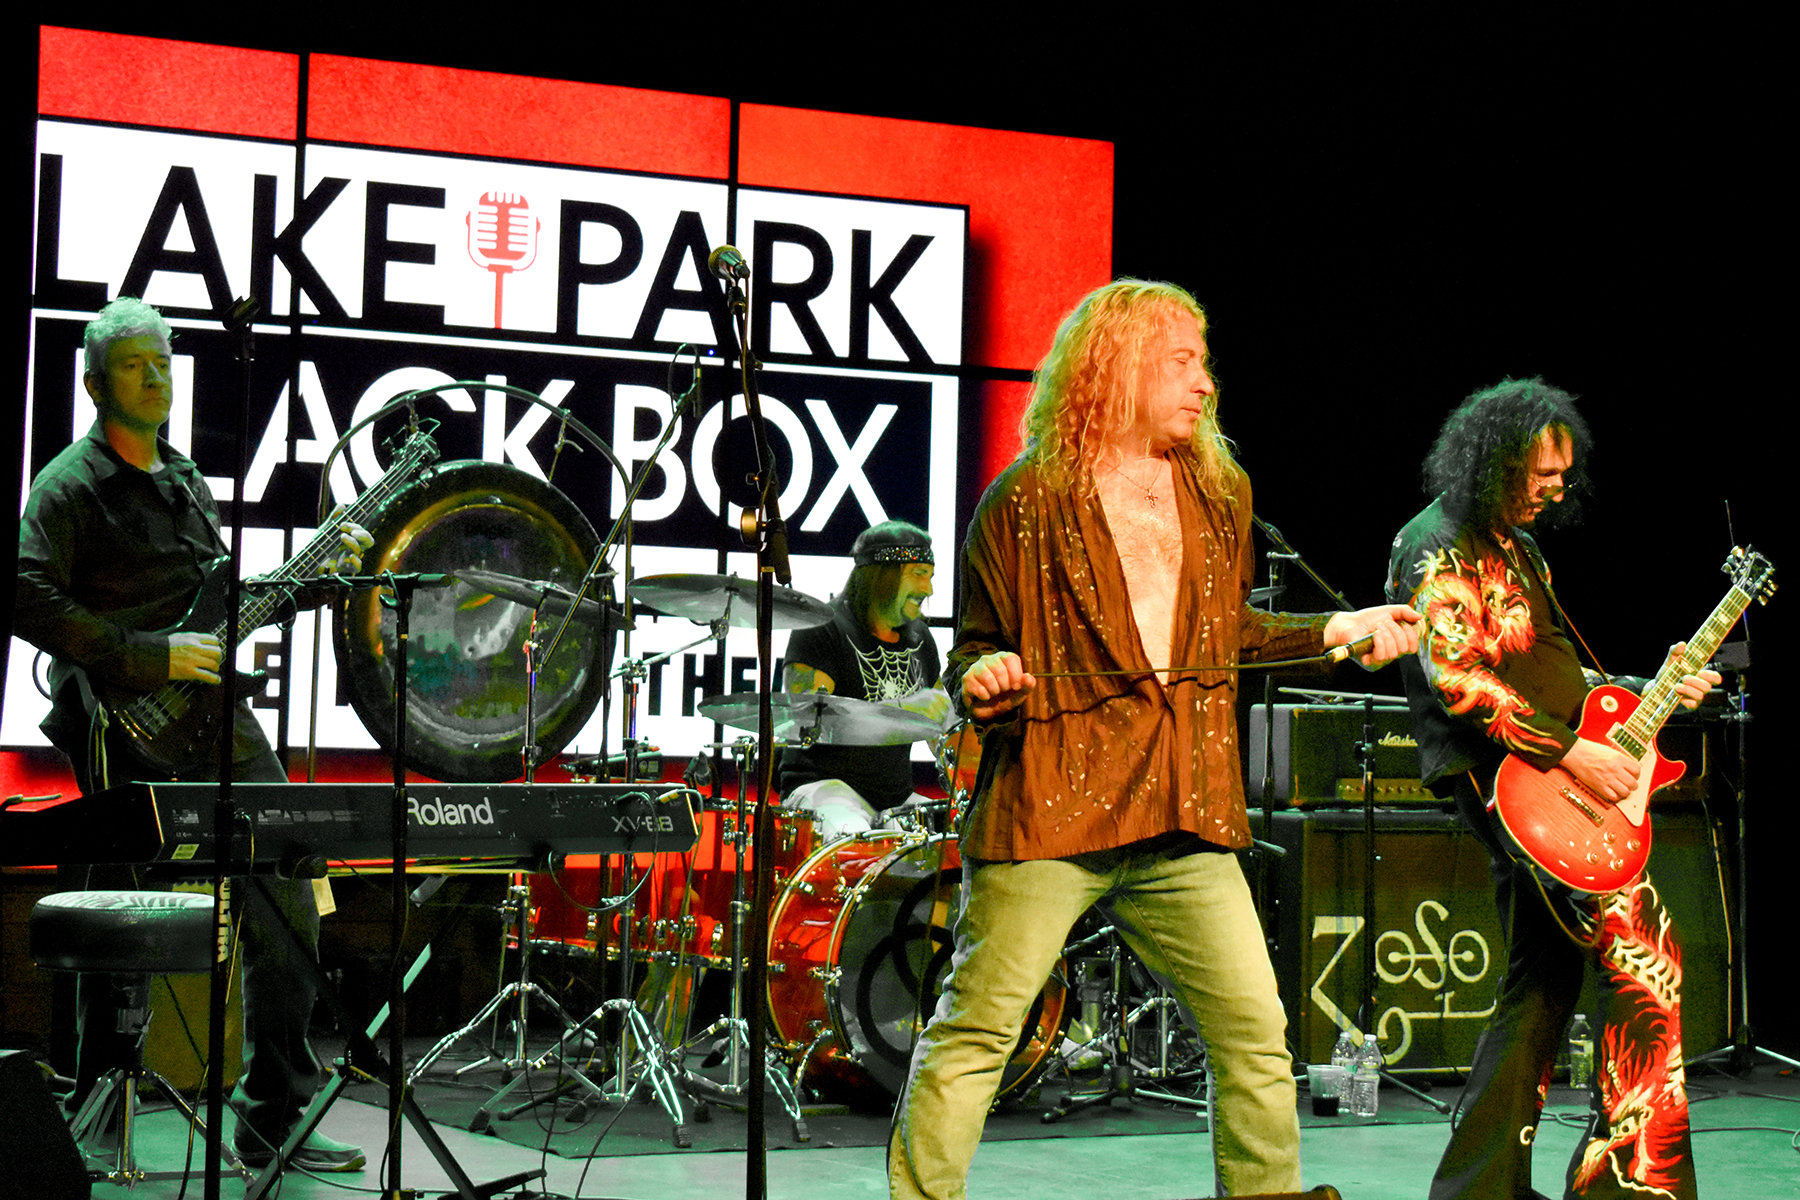 Led Zep tribute band makes big impact before small audience